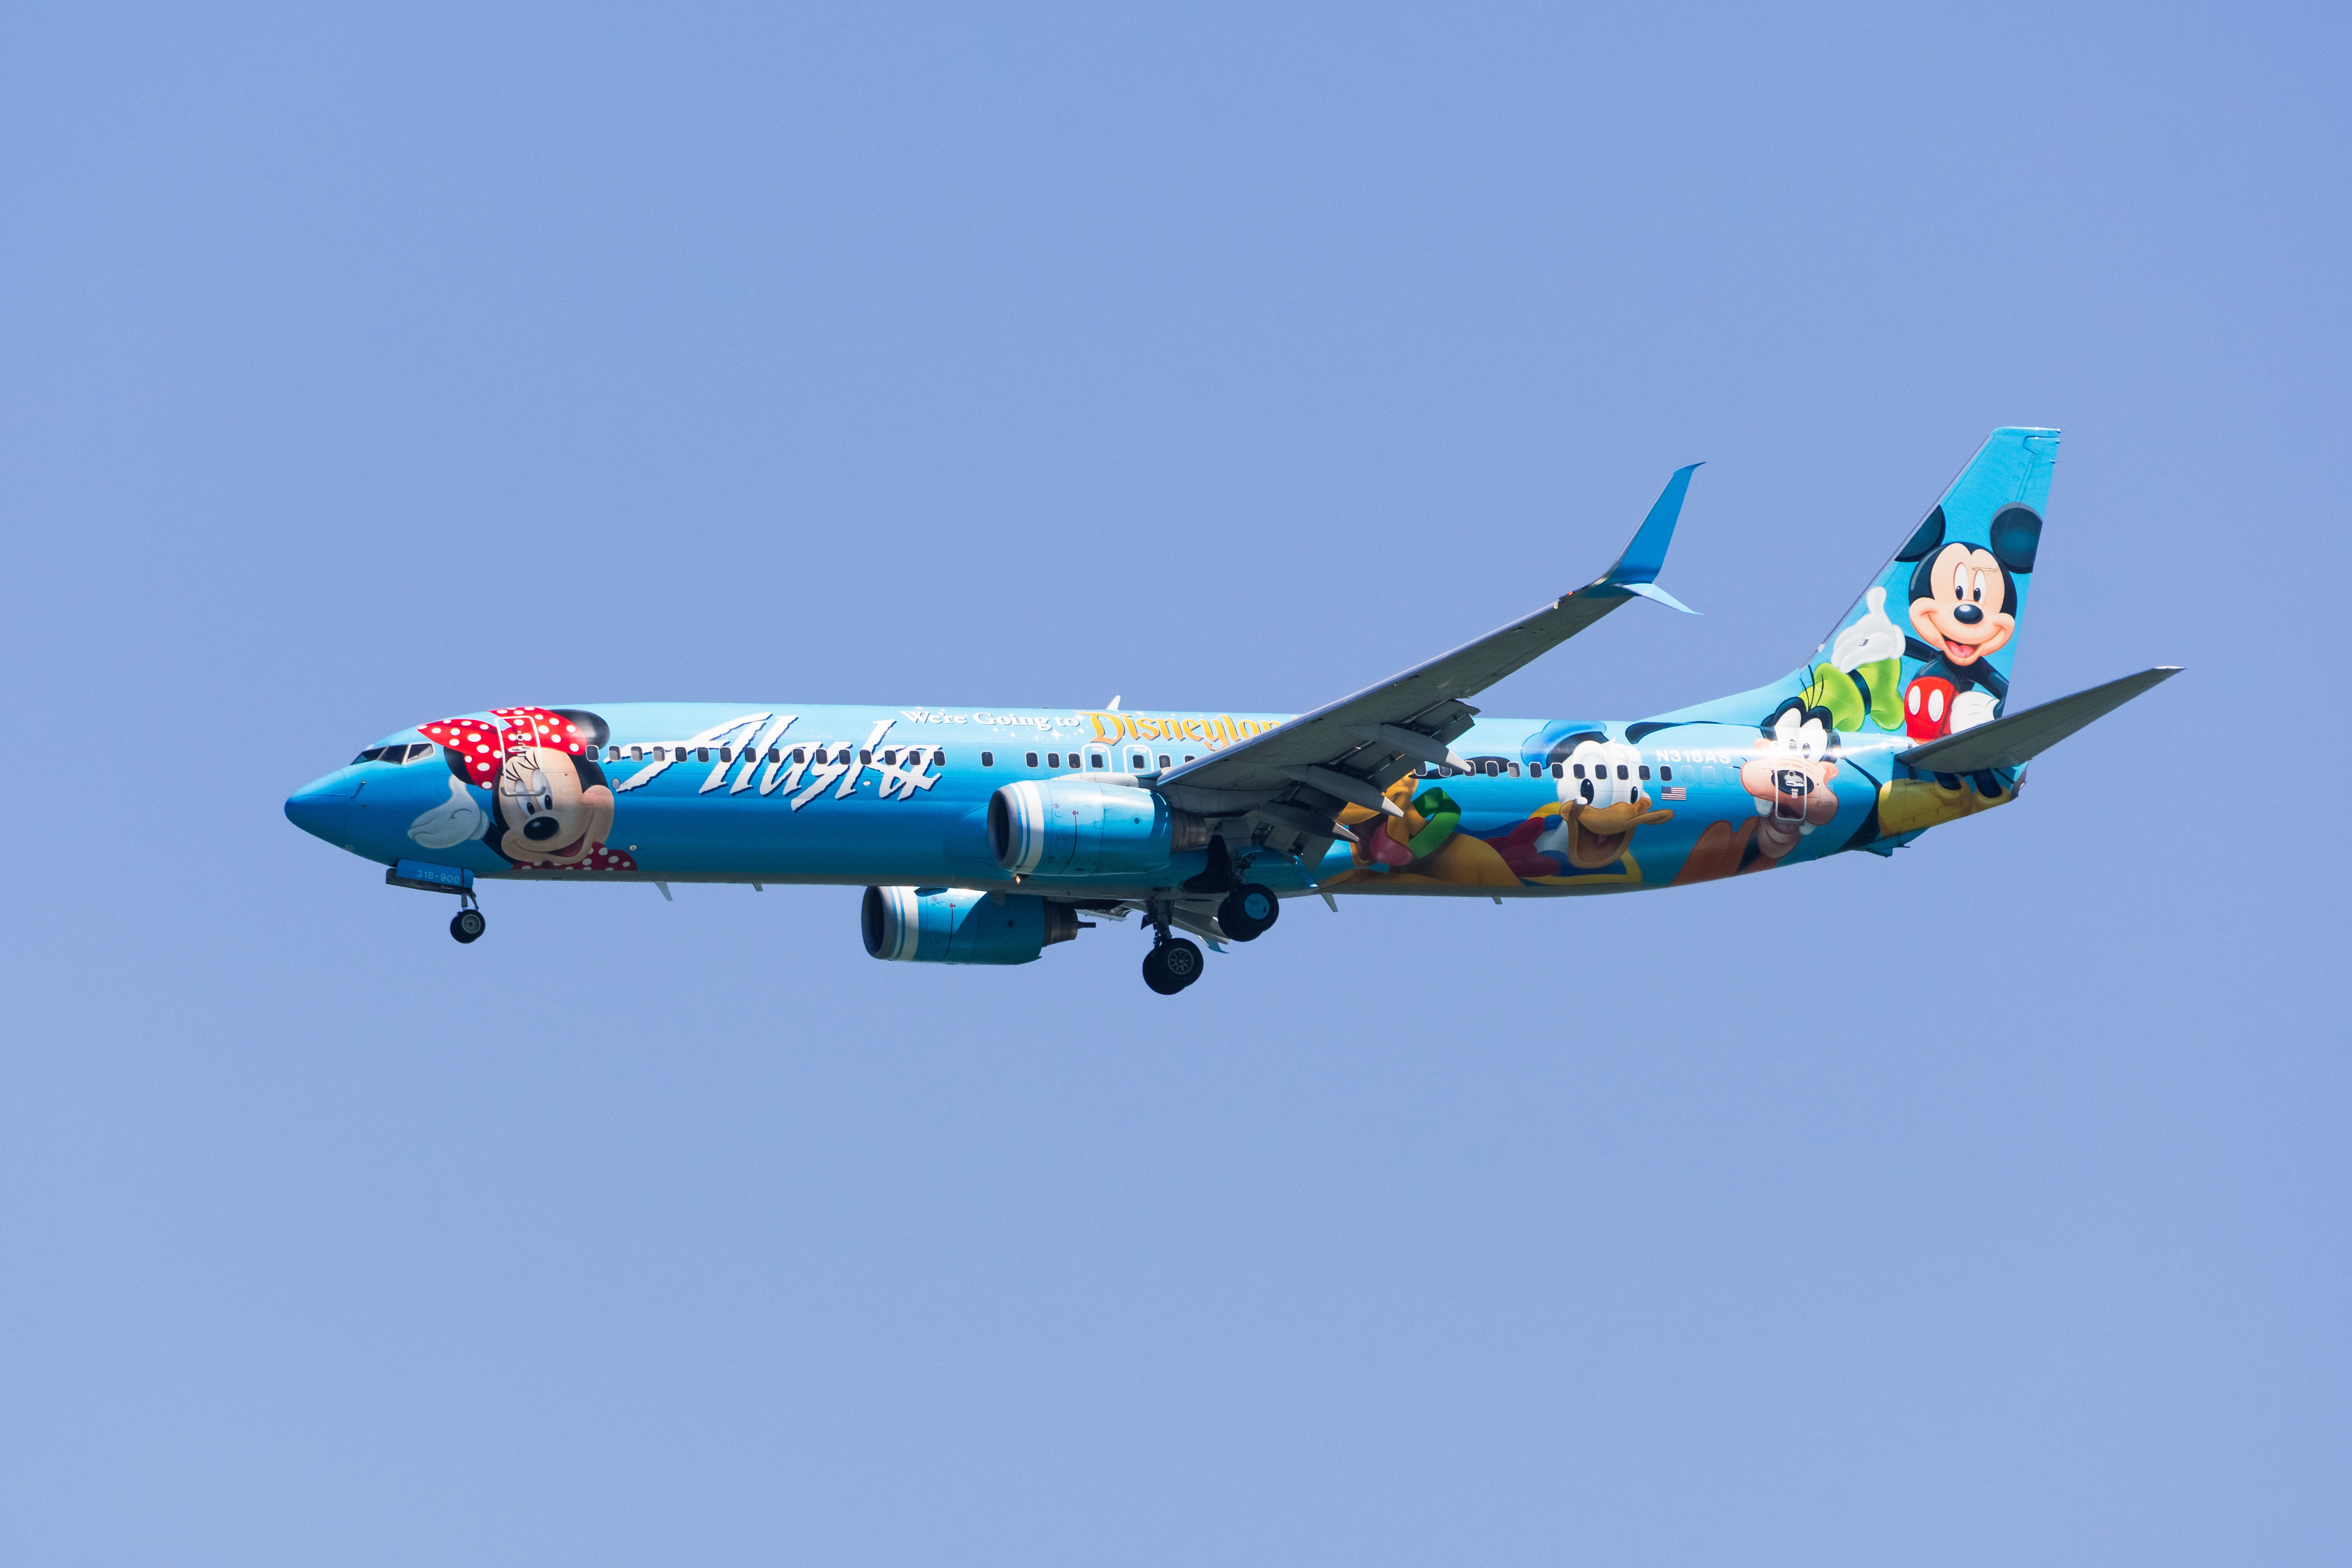 Alaska Airlines Boeing 737 with the Disneyland livery shutterstock_1492797707